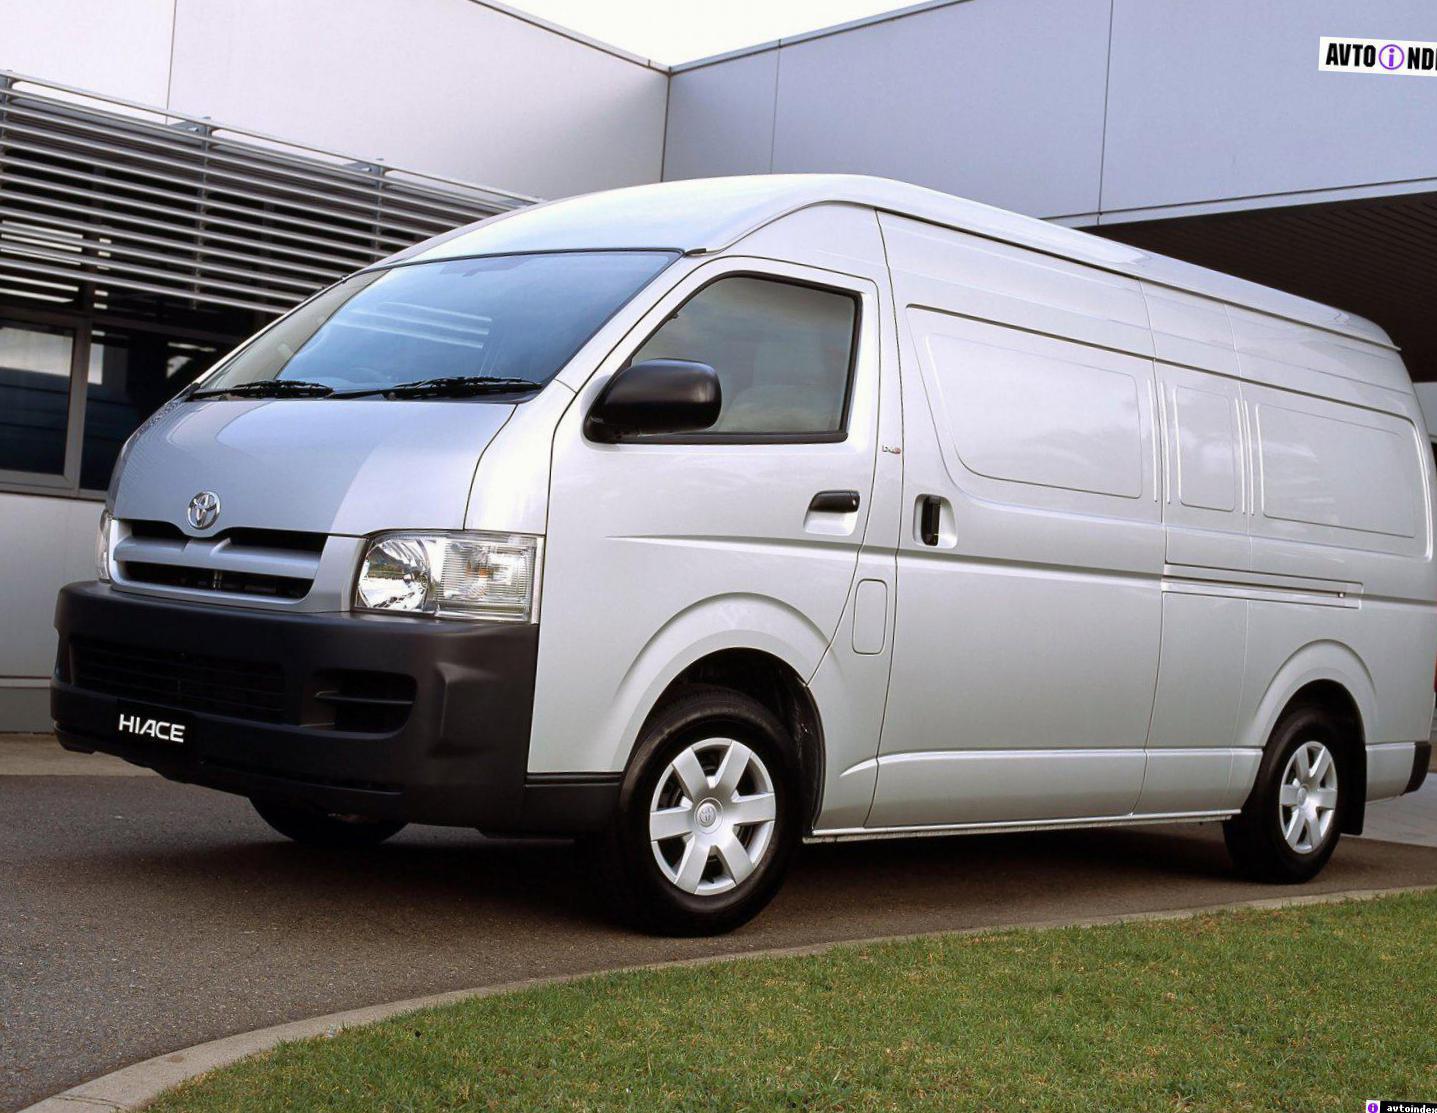 Hiace Toyota approved 2014